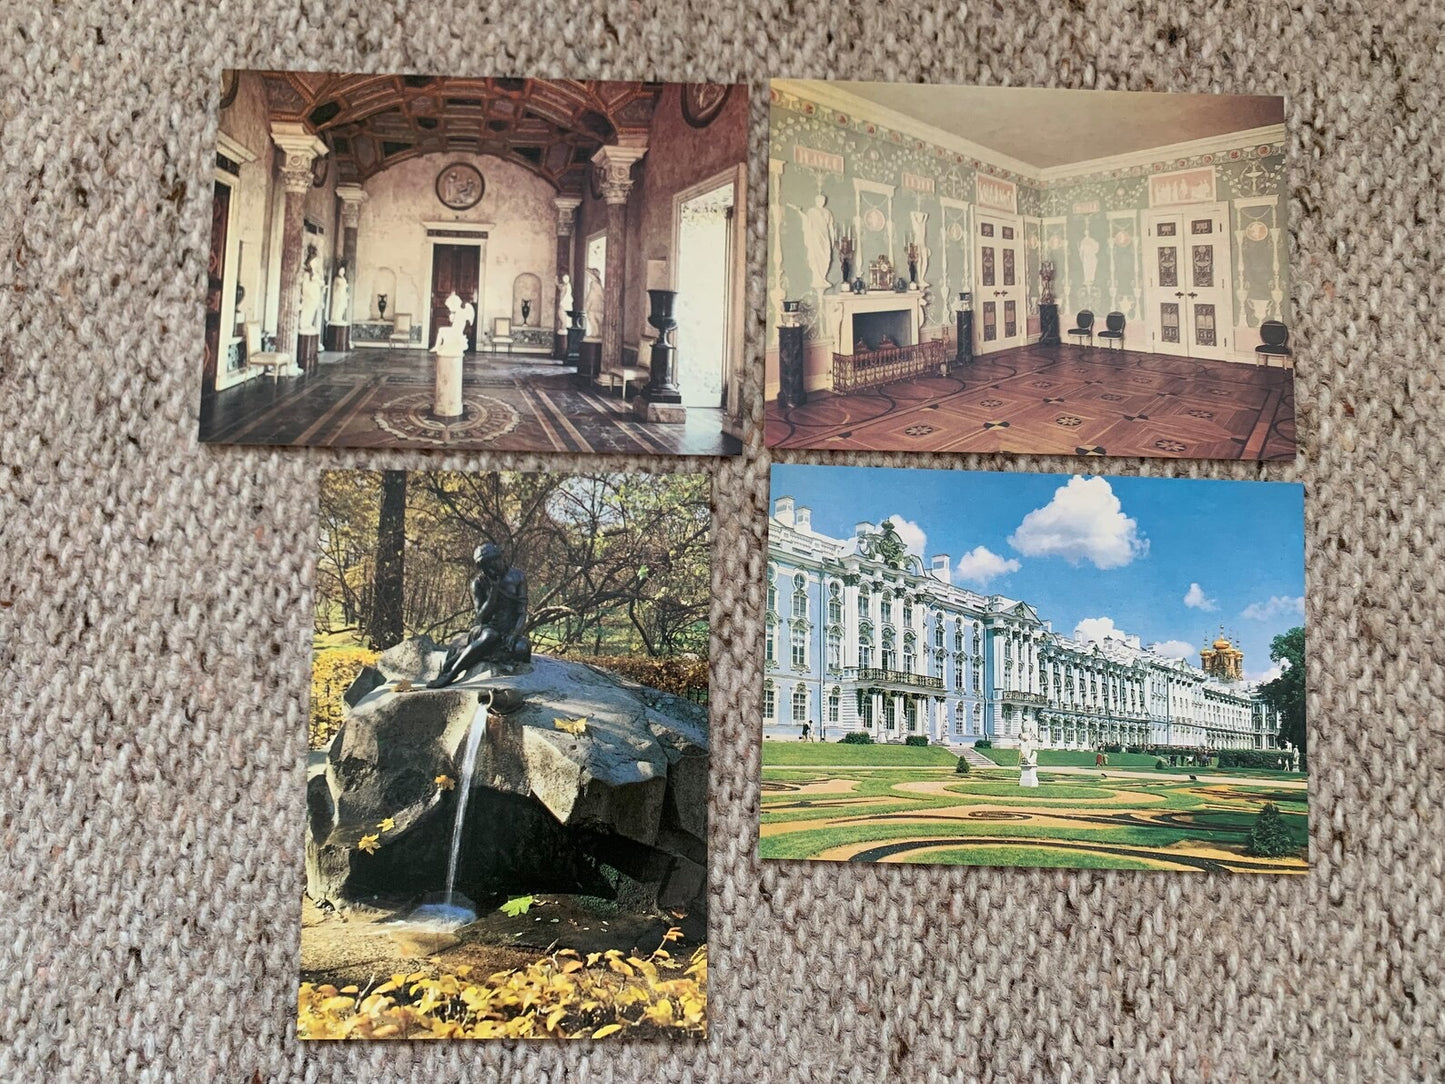 PUSHKIN The Palace and Parks set of 16 postcards - Soviet postcard set - Collectible view cards - Colour print